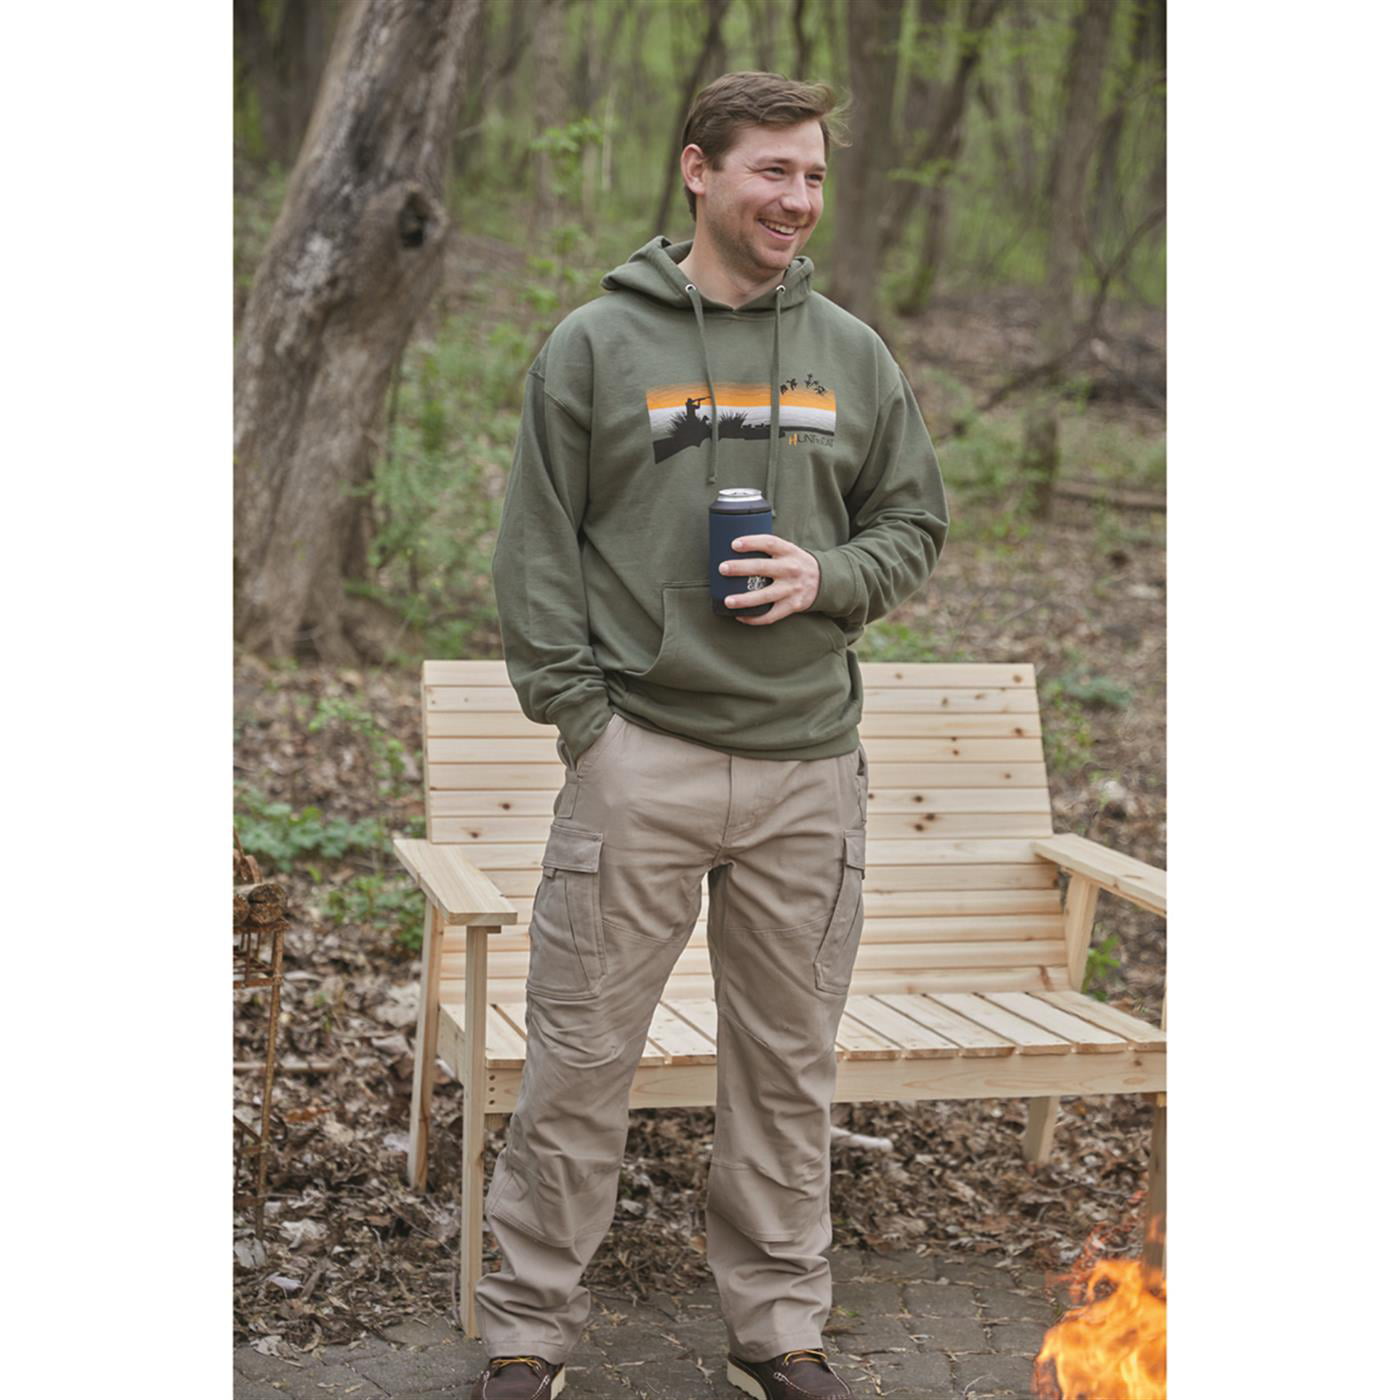 Guide Gear Cargo Pants for Men with Pockets Cotton, Tactical Work Hiking  Military Pants 